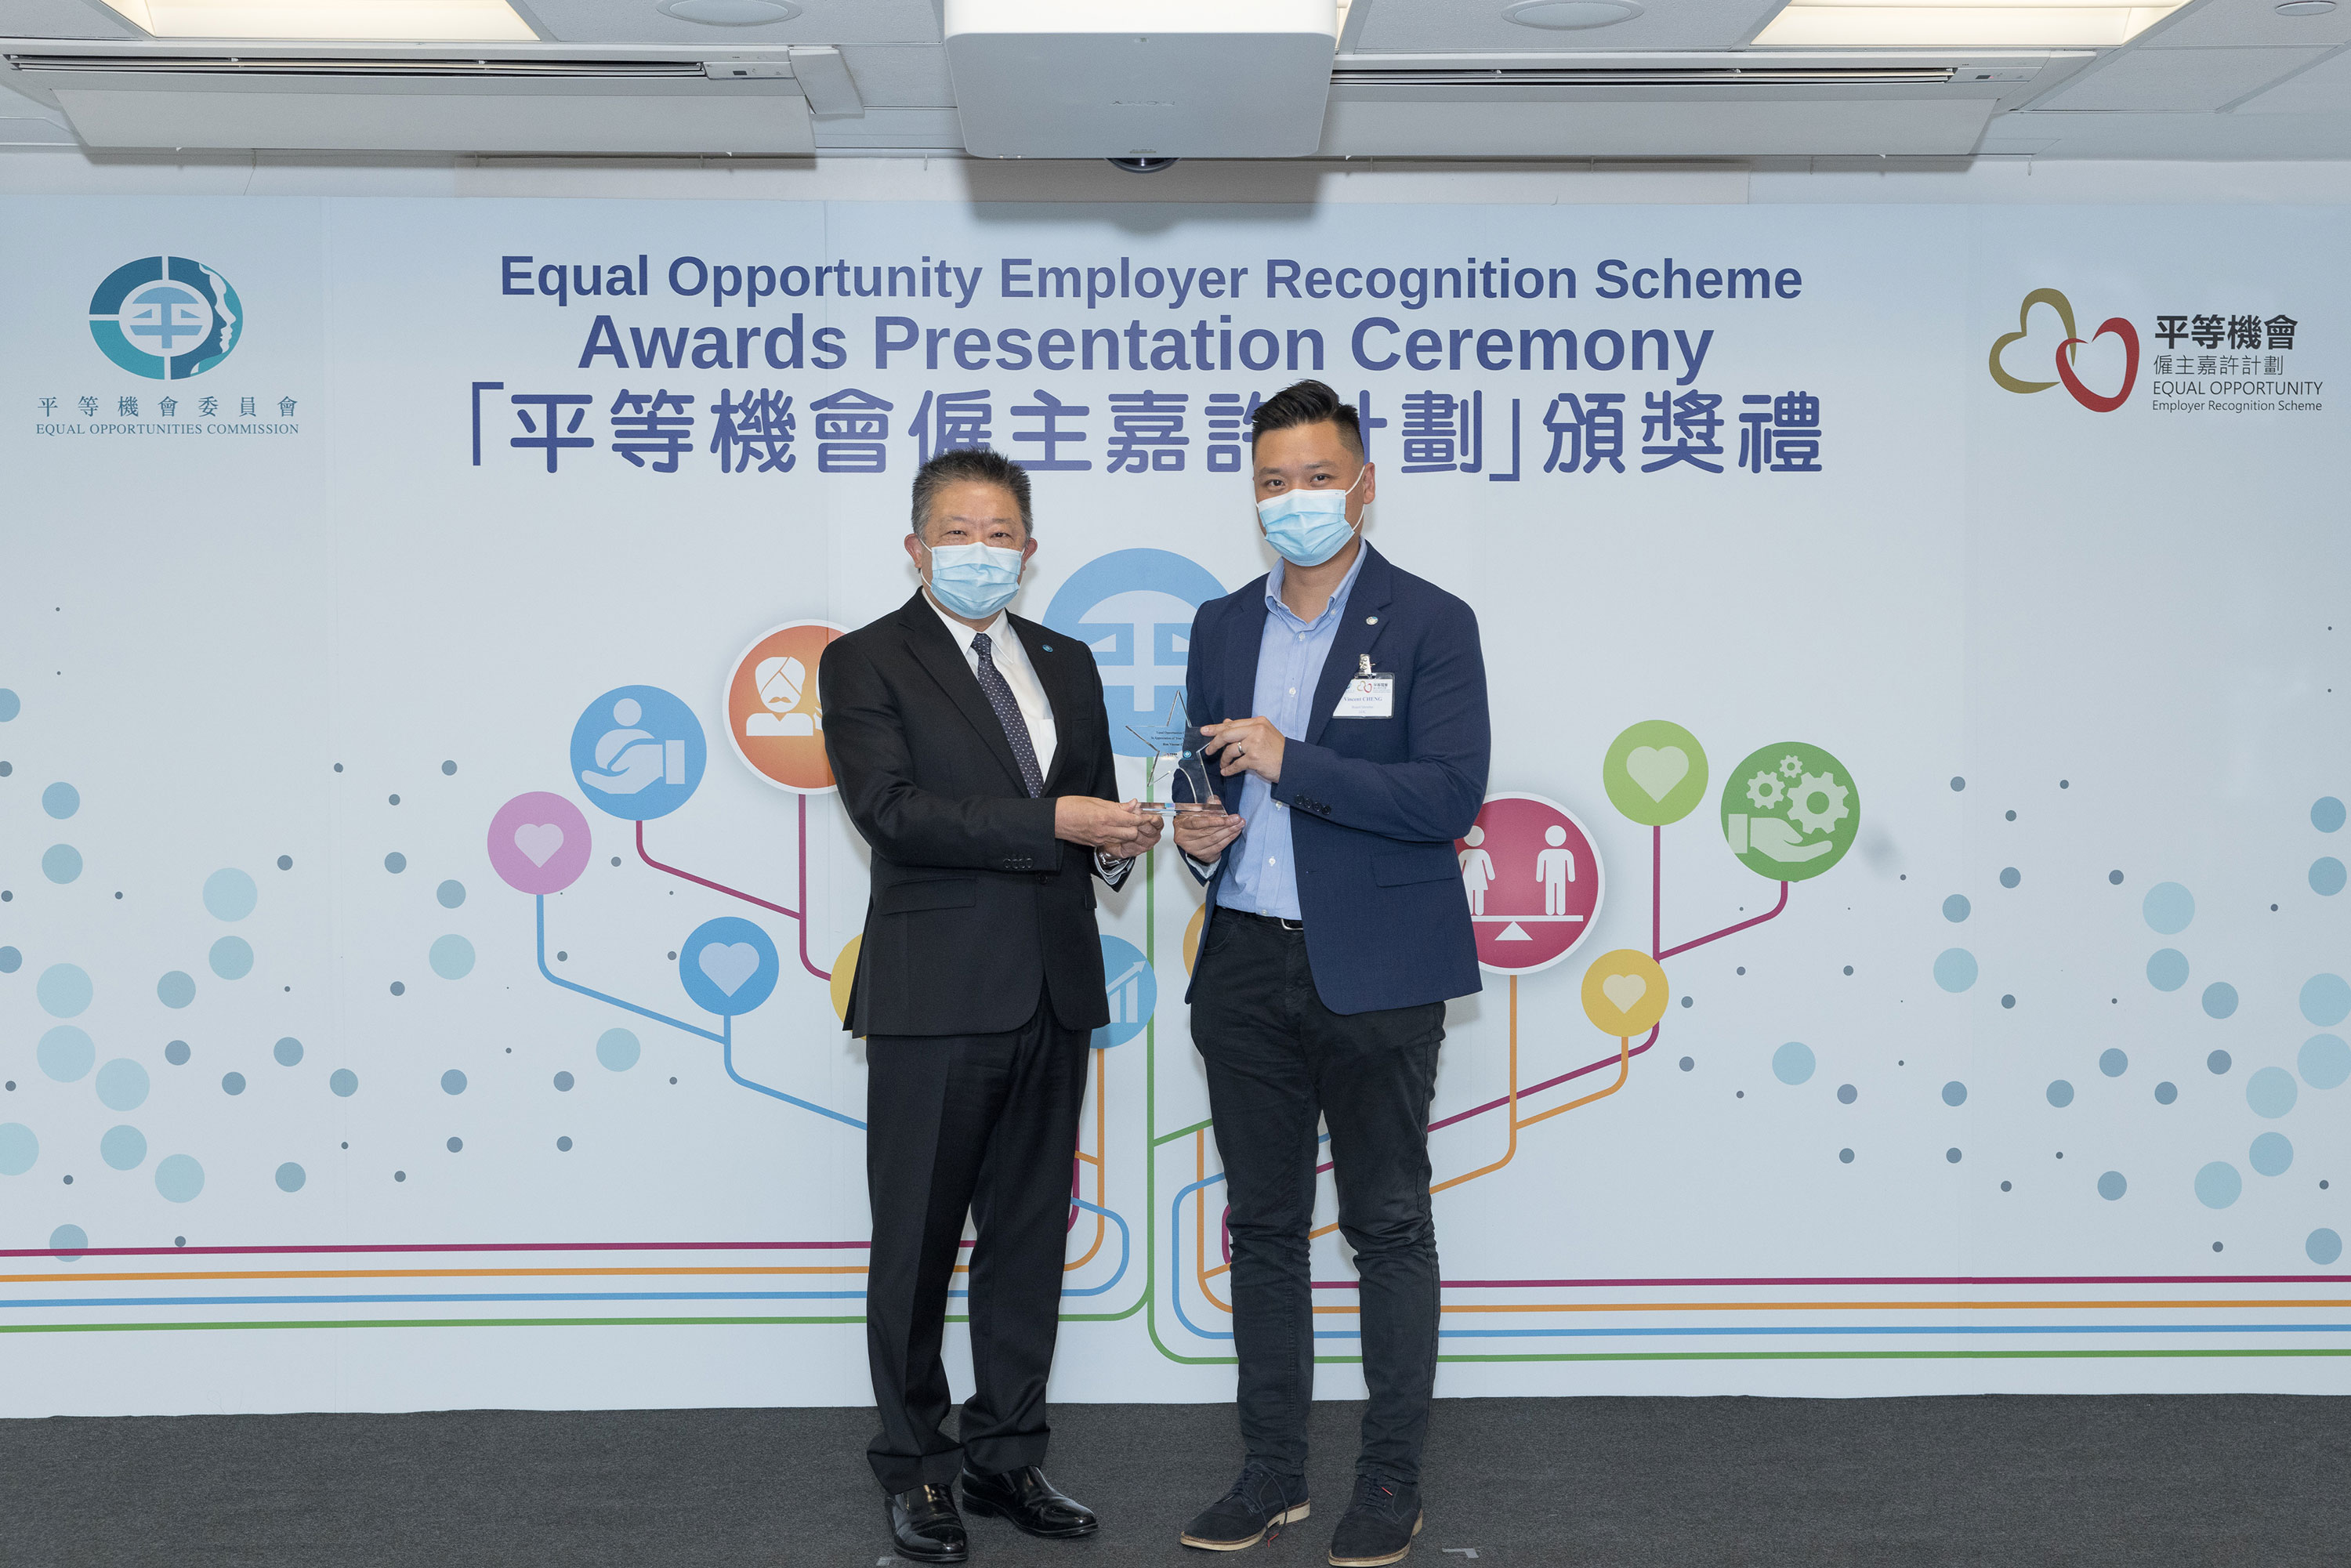 Mr Ricky CHU Man-kin, IDS, Chairperson of the Equal Opportunities Commission (left) presents souvenir to EOC Member The Hon Vincent CHENG, MH, JP (right), who served as member of the assessment panel of the Equal Opportunity Employer Recognition Scheme.